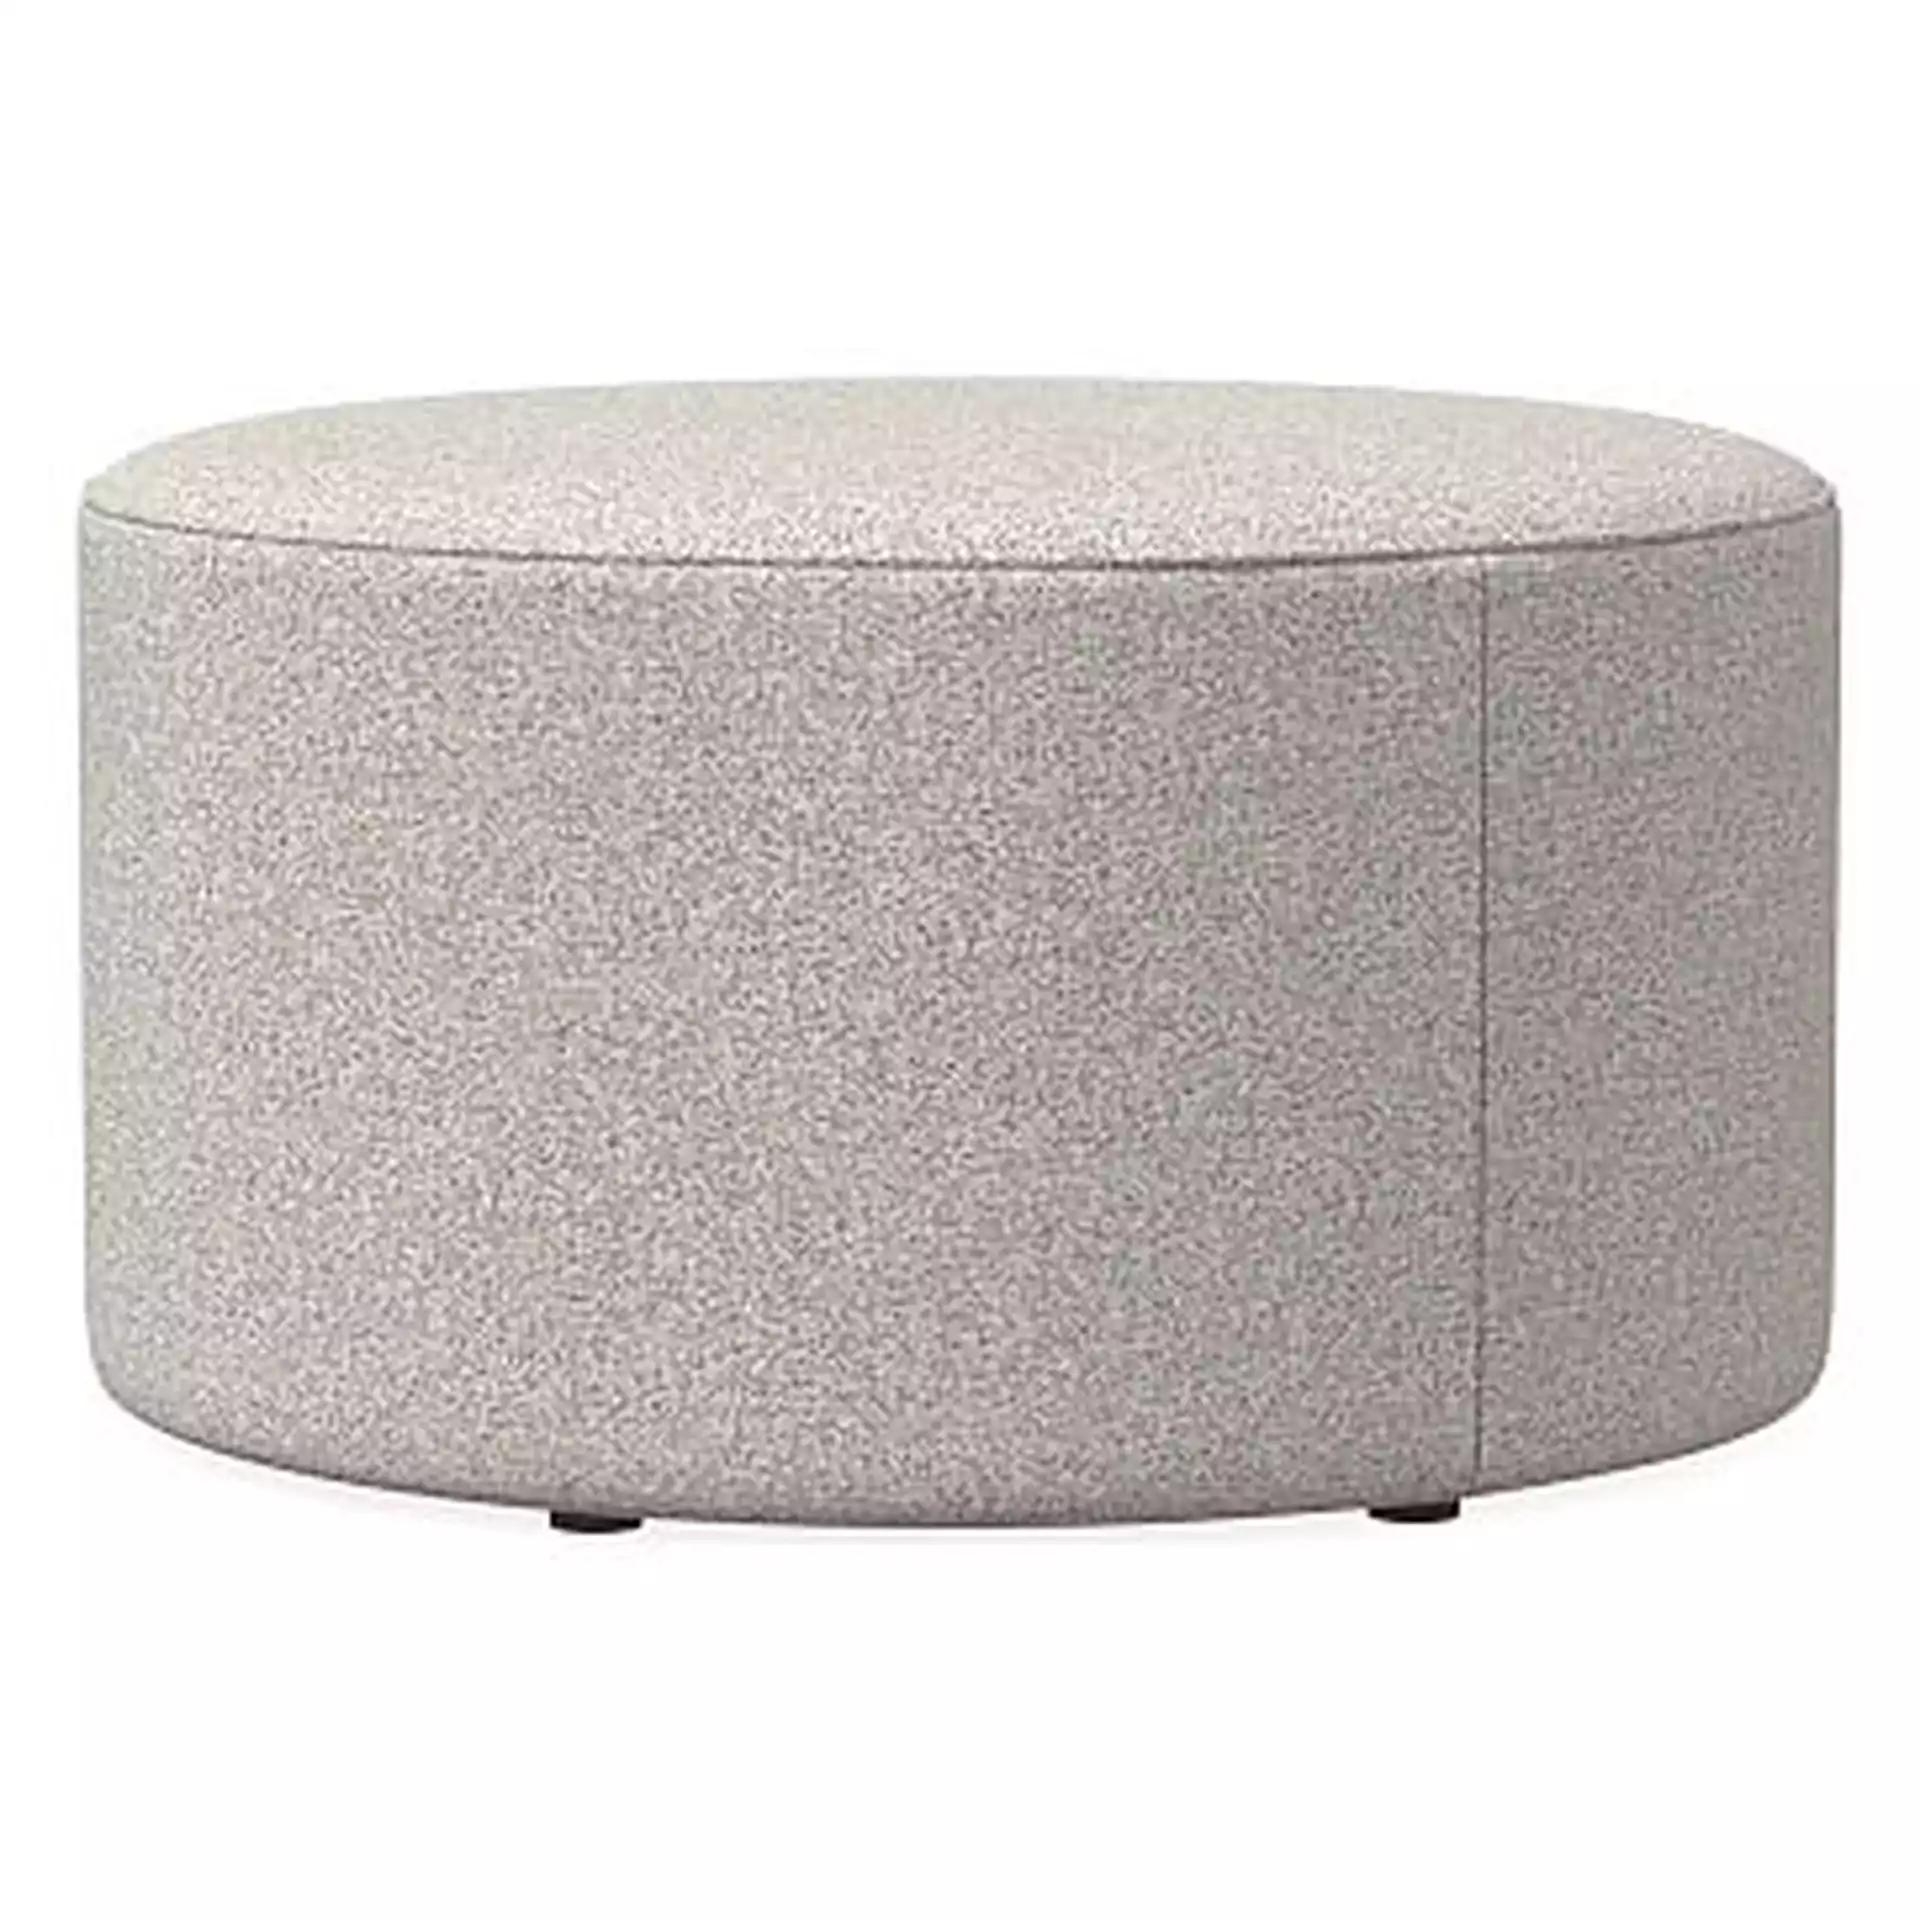 Isla Large Ottoman, Poly, Chenille Tweed, Storm Gray, Concealed Supports